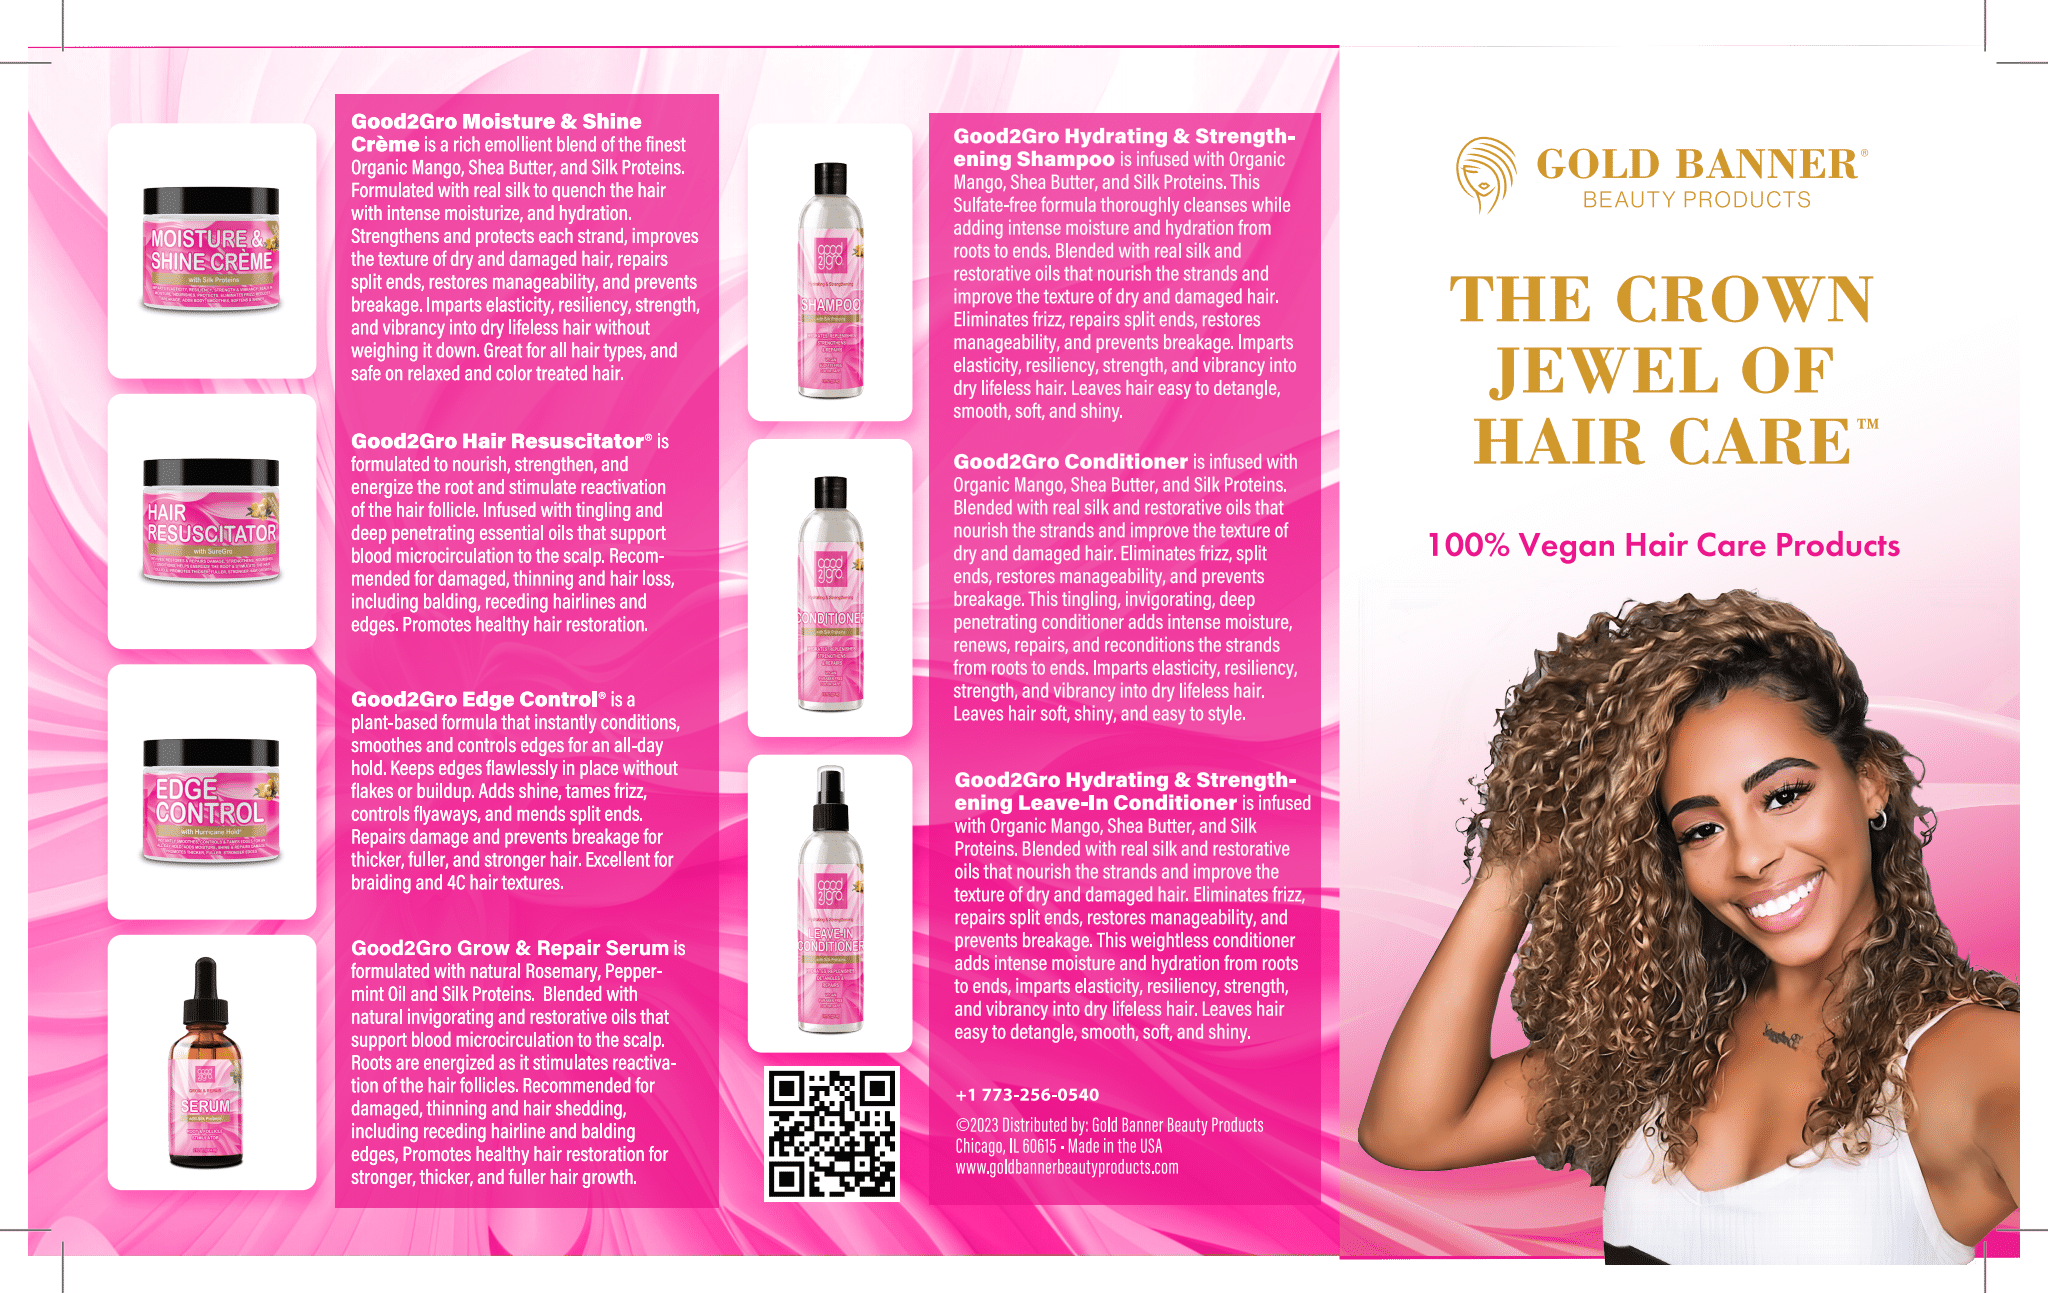 Good2Gro Hydrating & Strengthening Leave-In-Conditioner with Silk Proteins, Weightless Conditioner Adds Moisture & Hydration, Imparts Elasticity, Resiliency & Strength Into Dry Lifeless Hair 8oz.